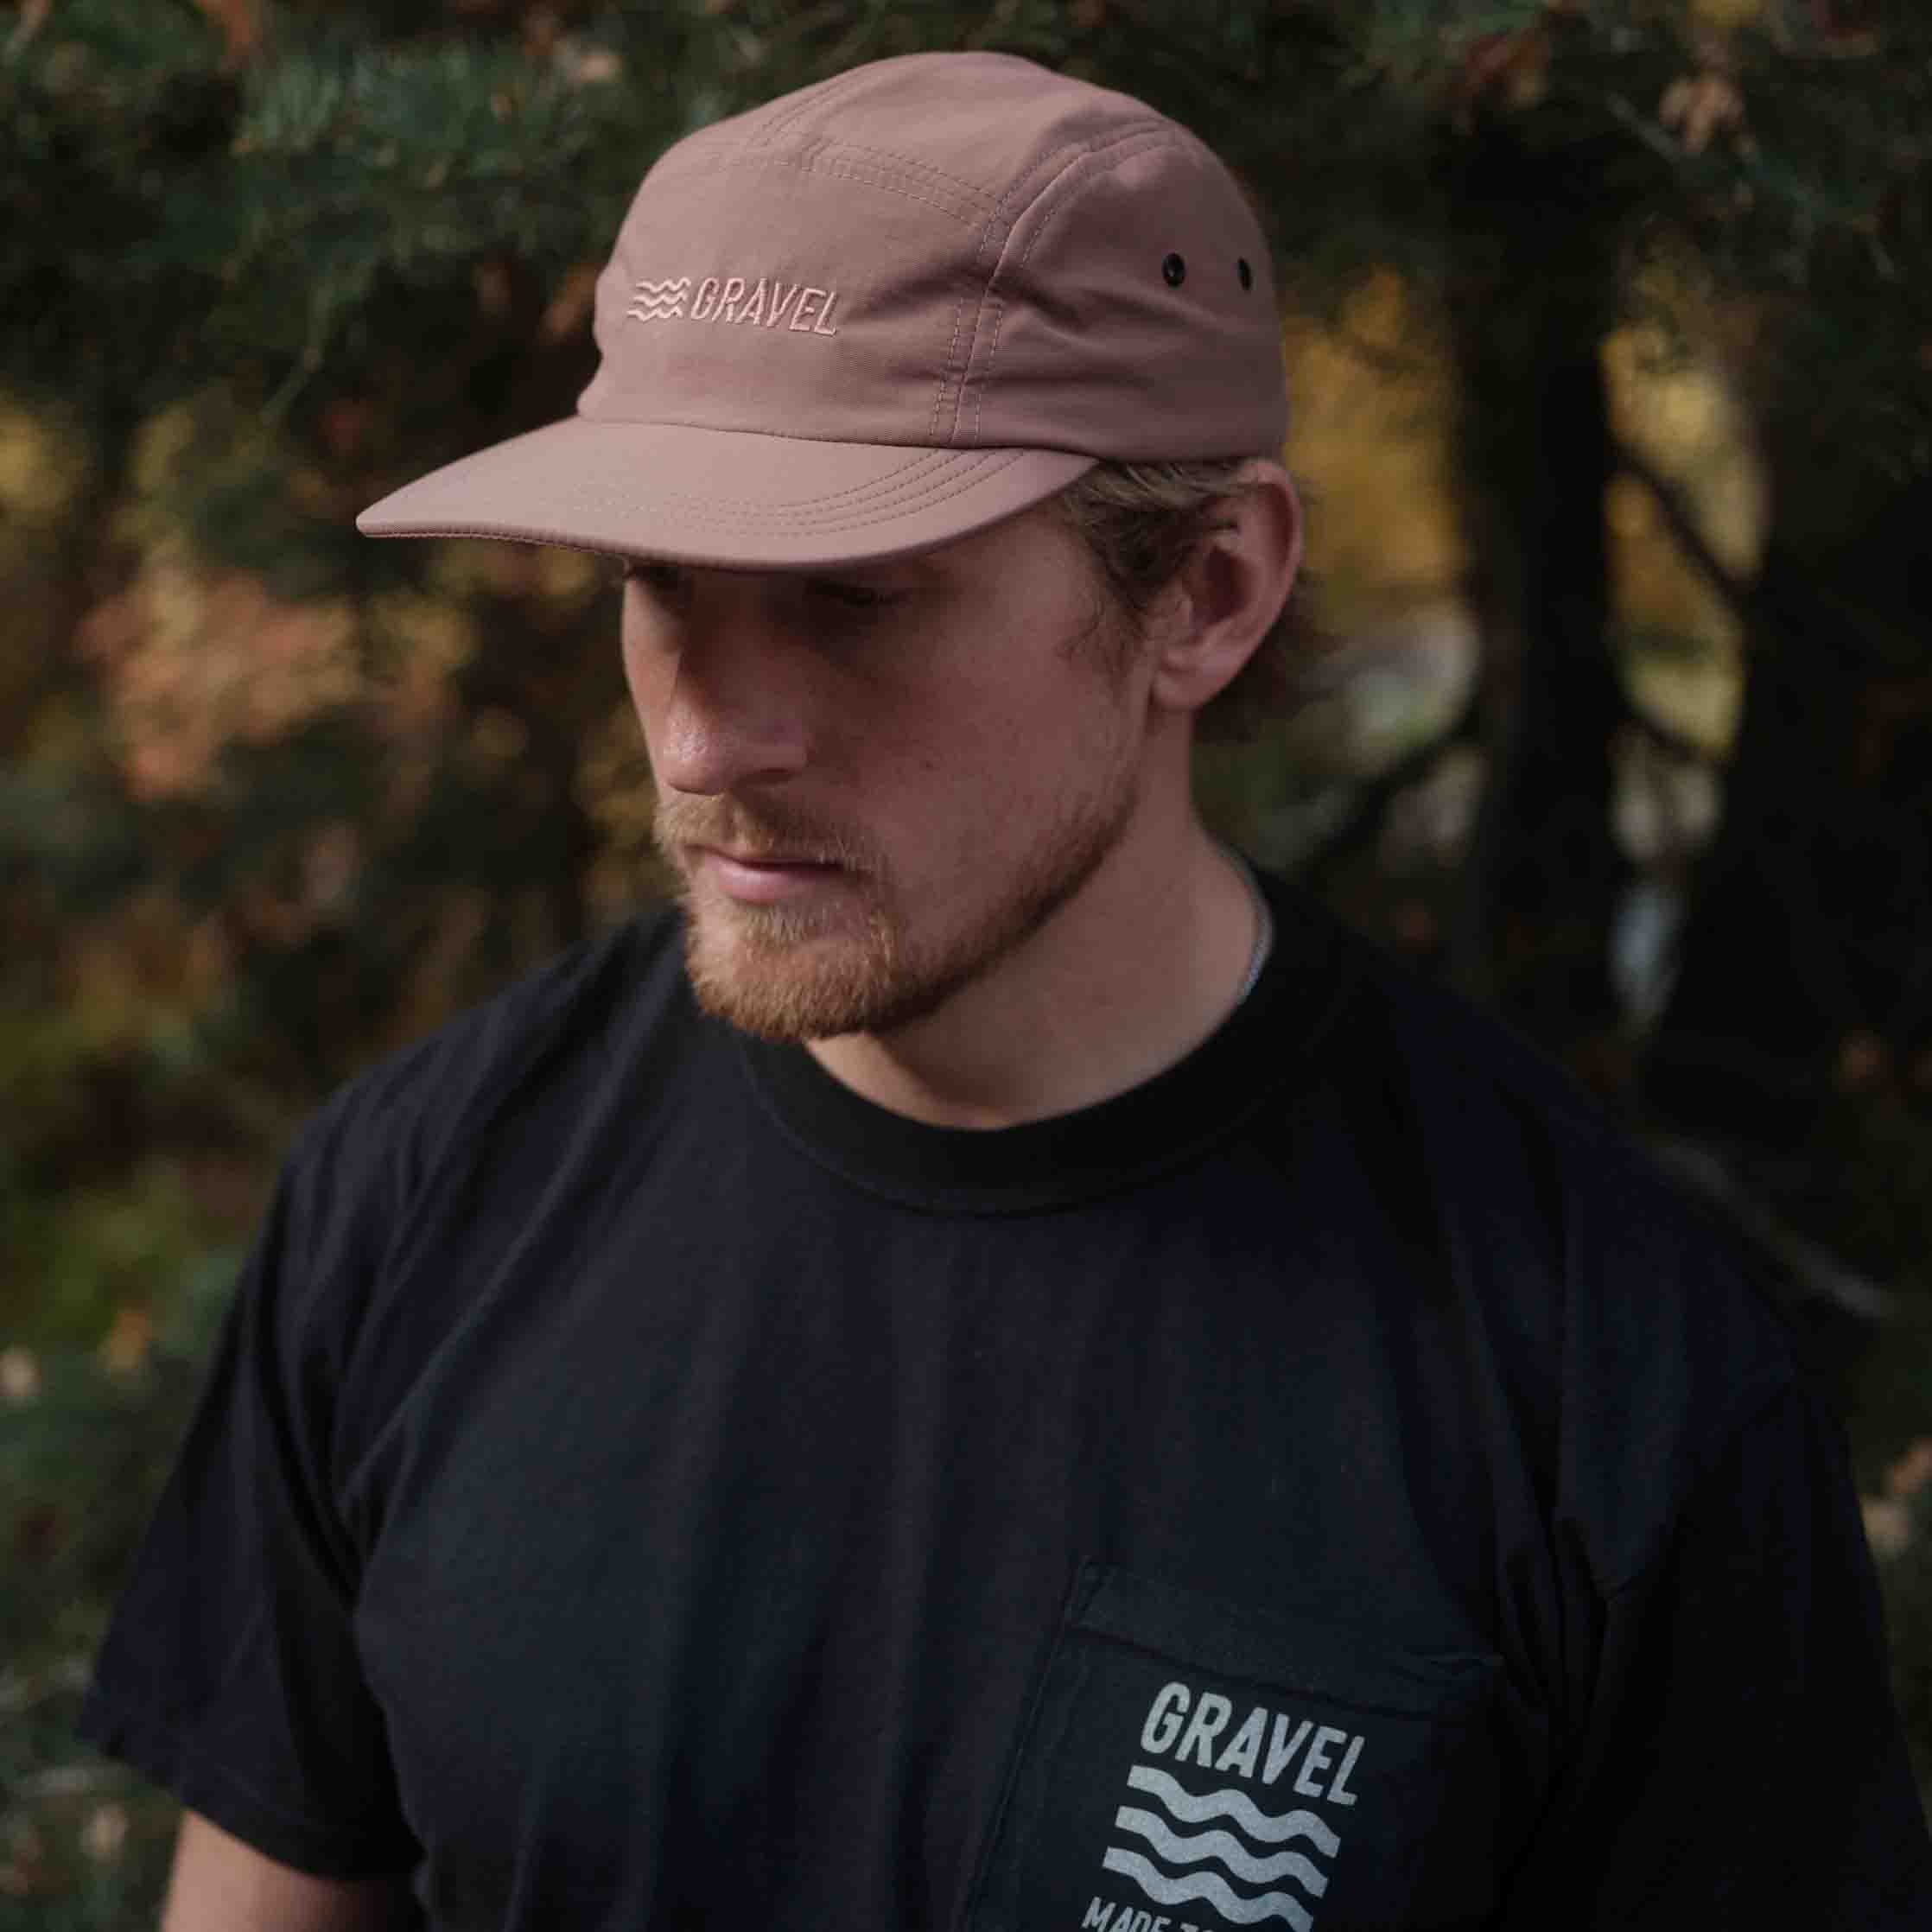 The Travelers Hat | Amber